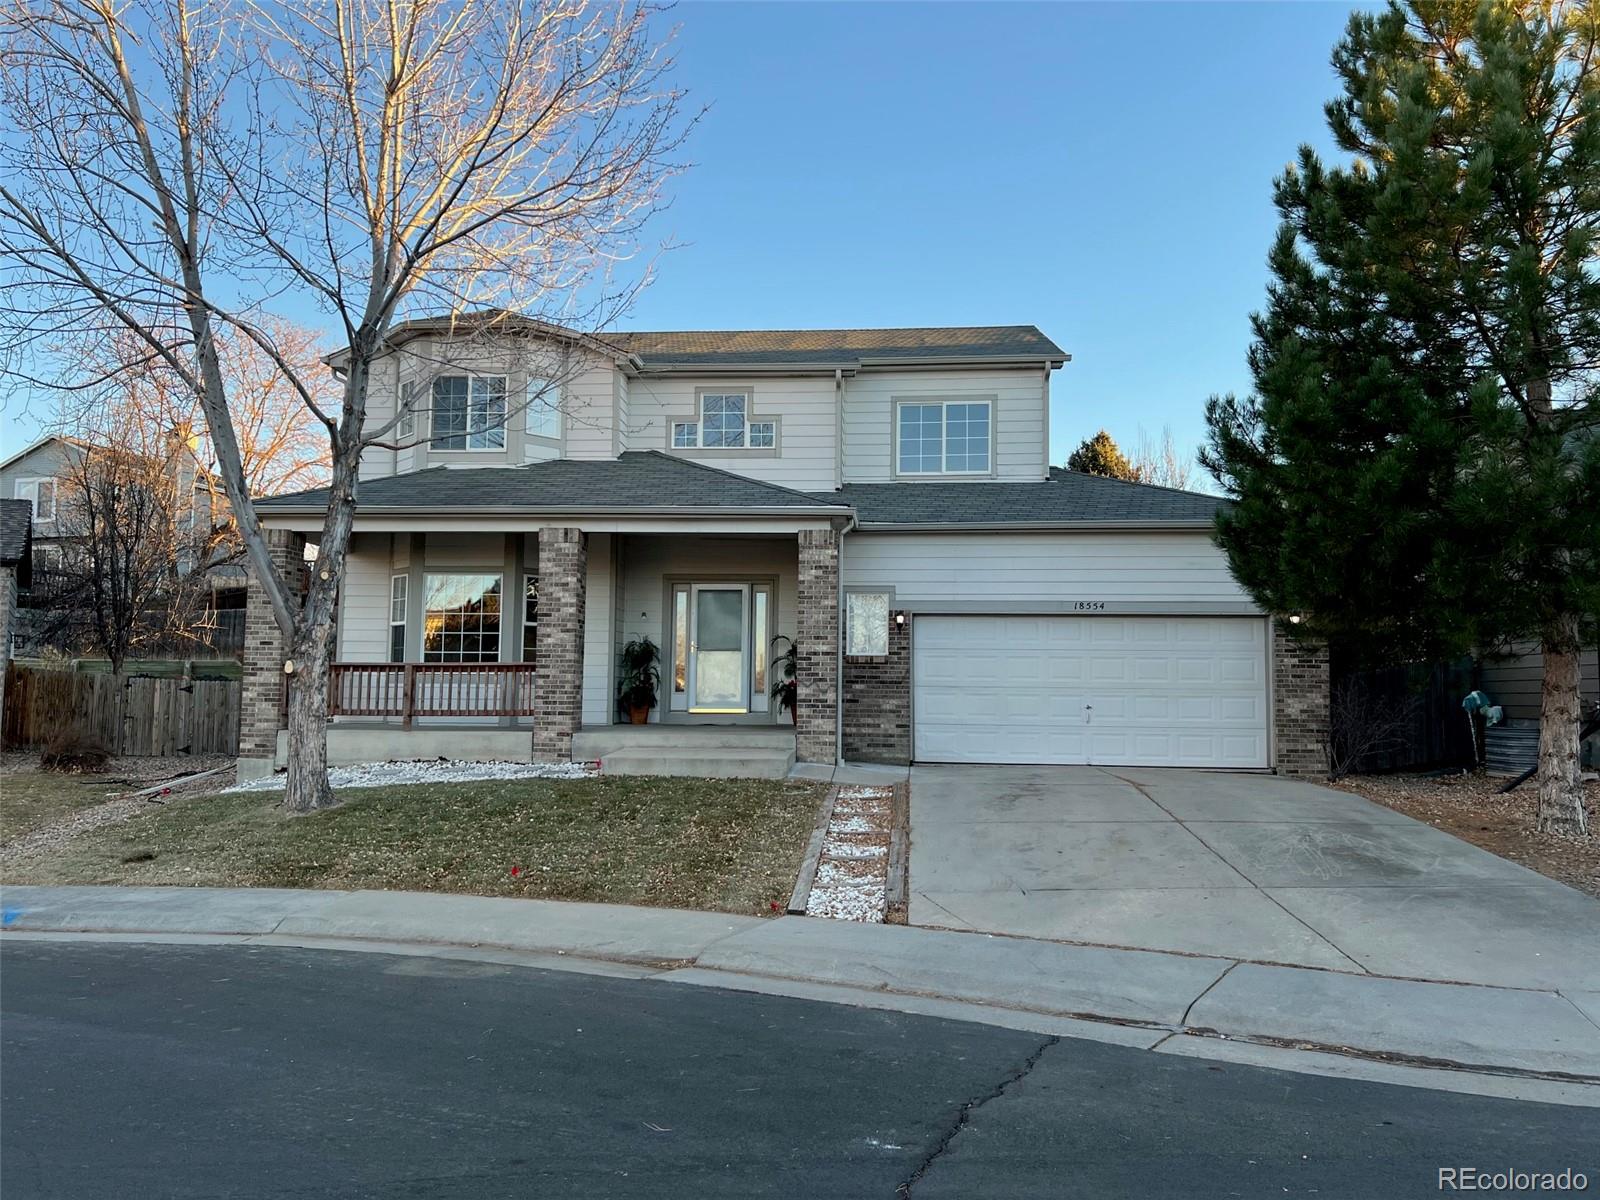 18554 E Bethany Place, aurora MLS: 6375836 Beds: 3 Baths: 3 Price: $556,000